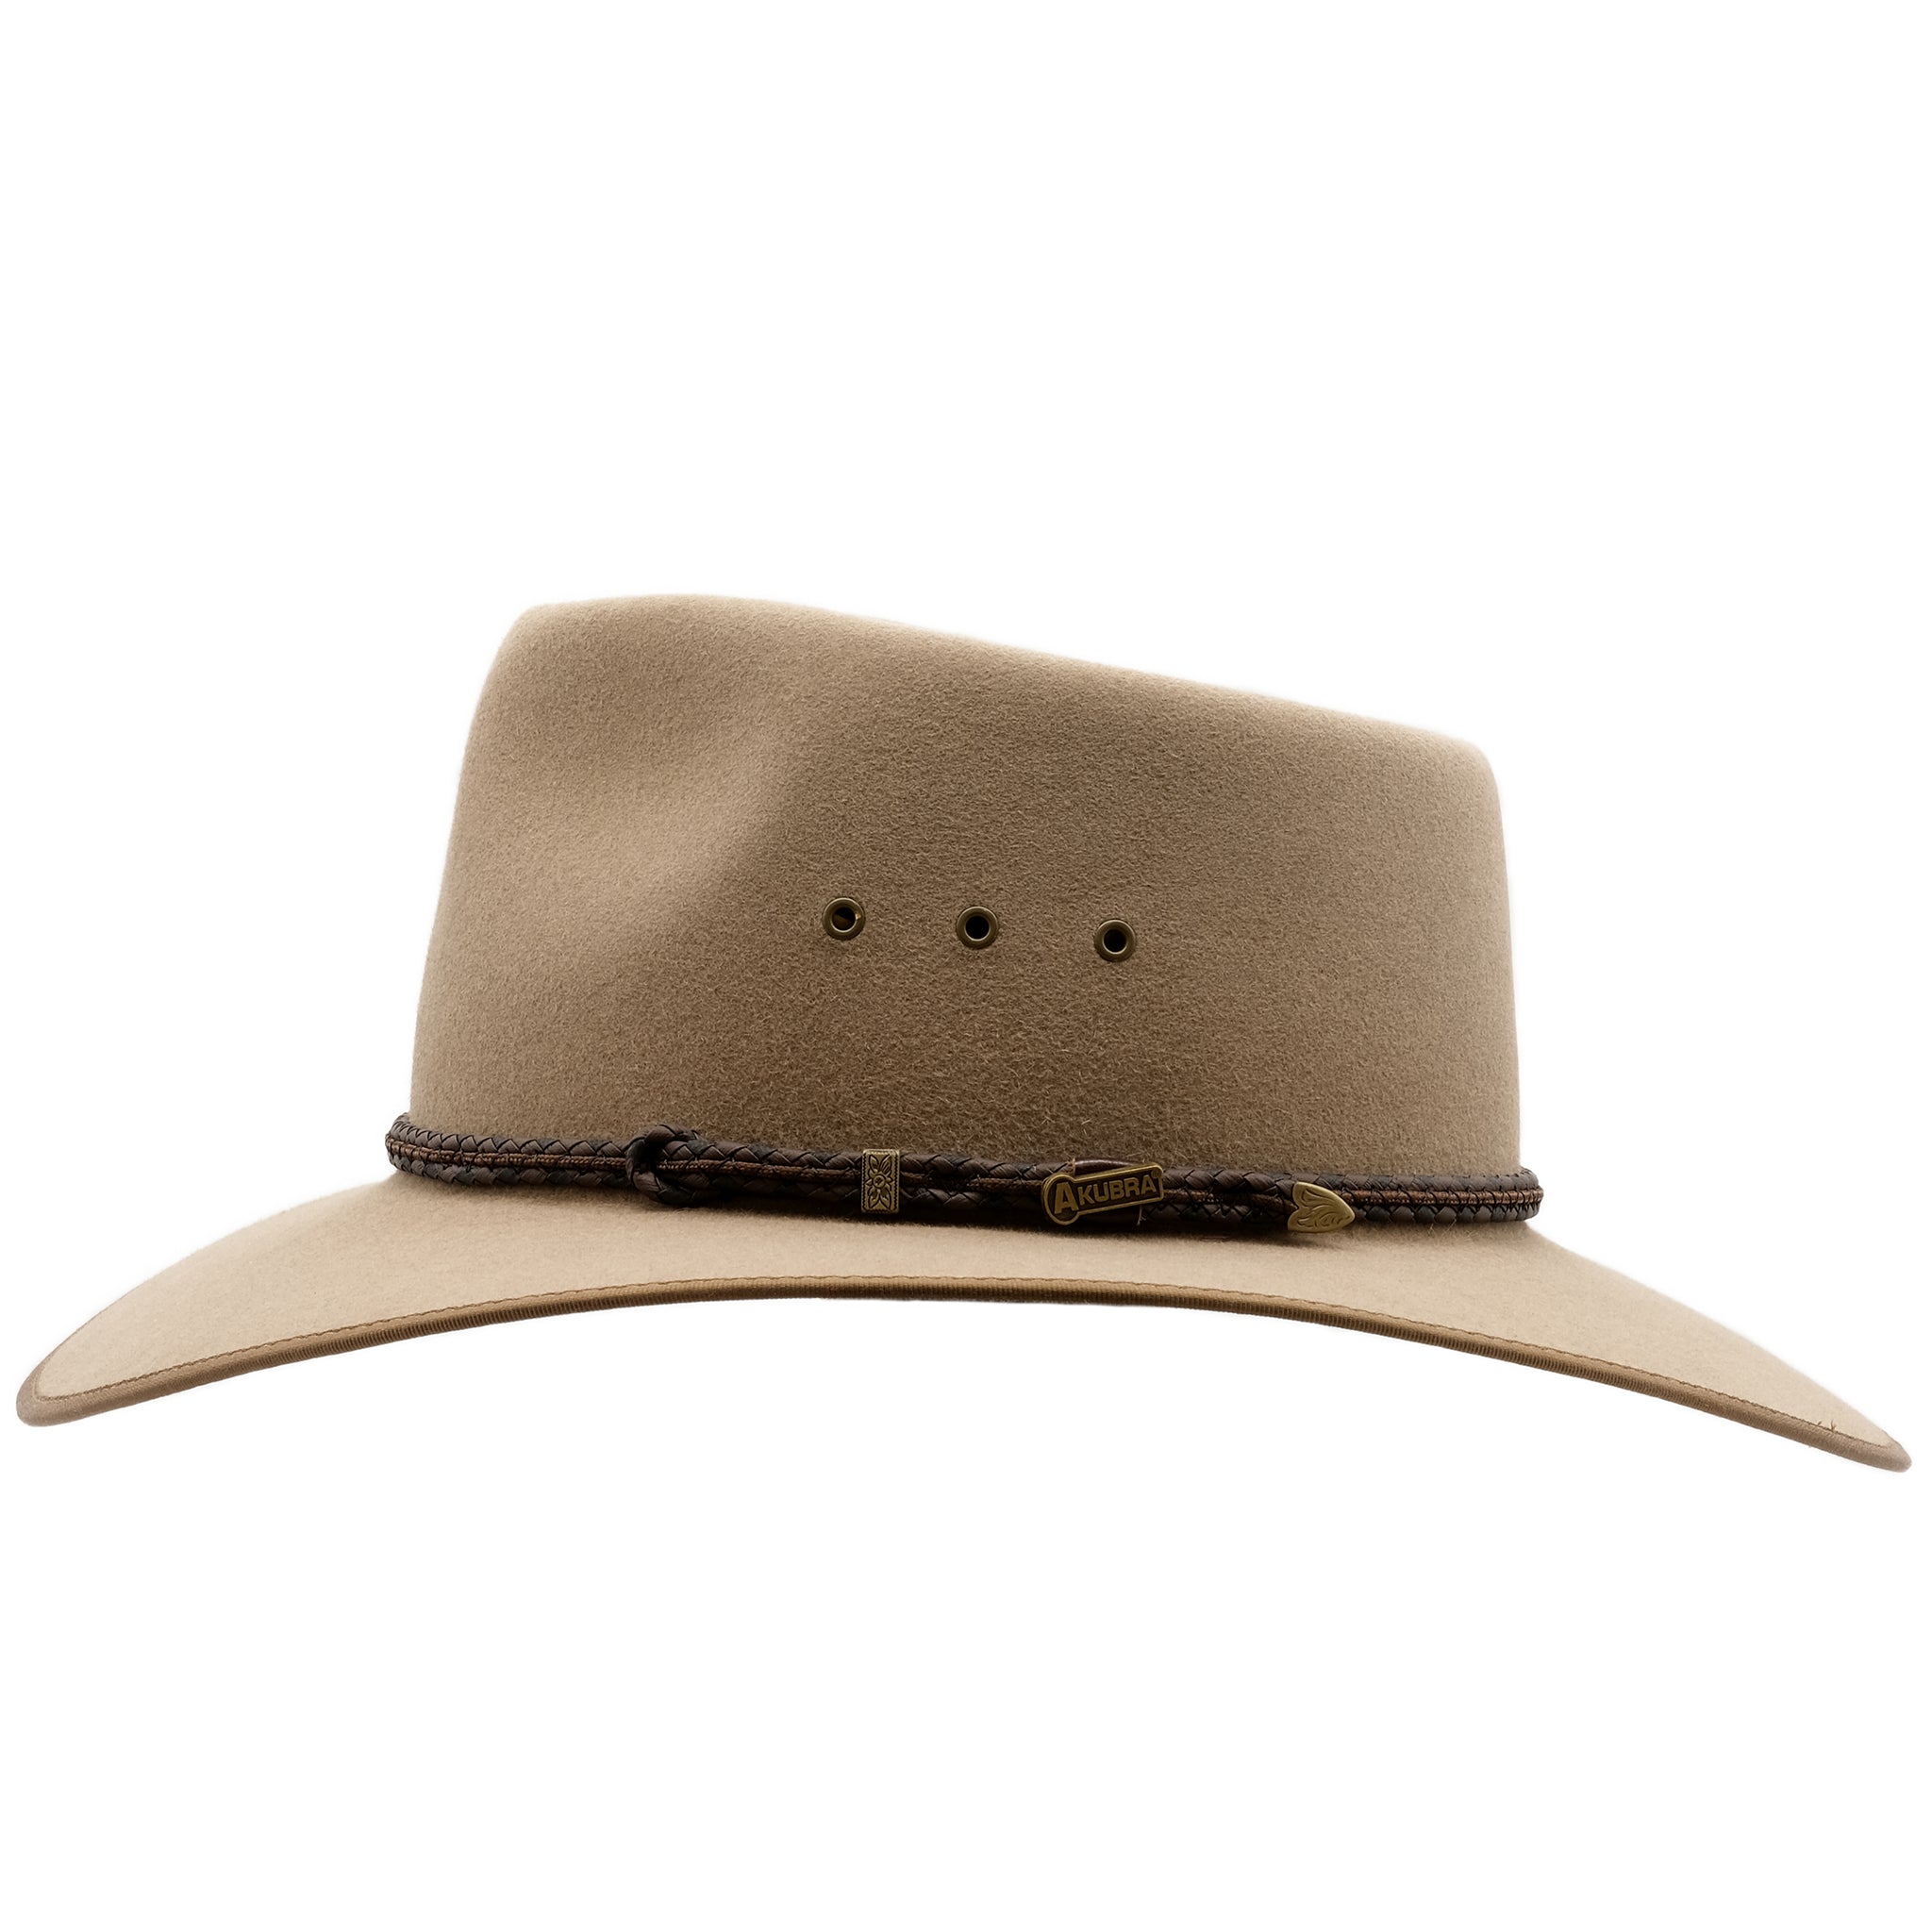 Side view of the Akubra Cattleman hat in Bran colour